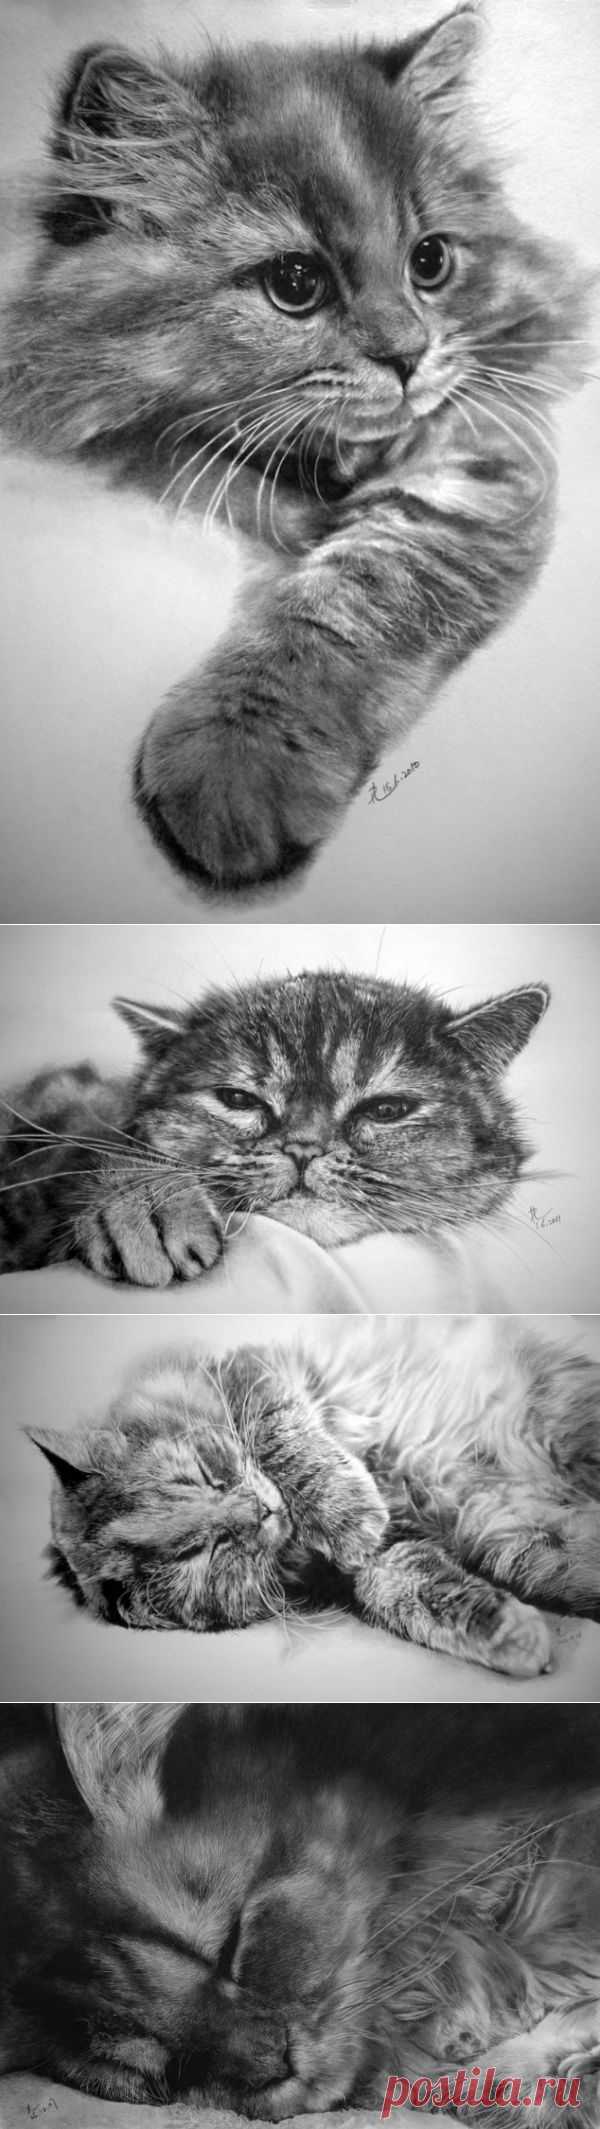 15 cat pictures you won't believe are pencil drawings | 22 Words